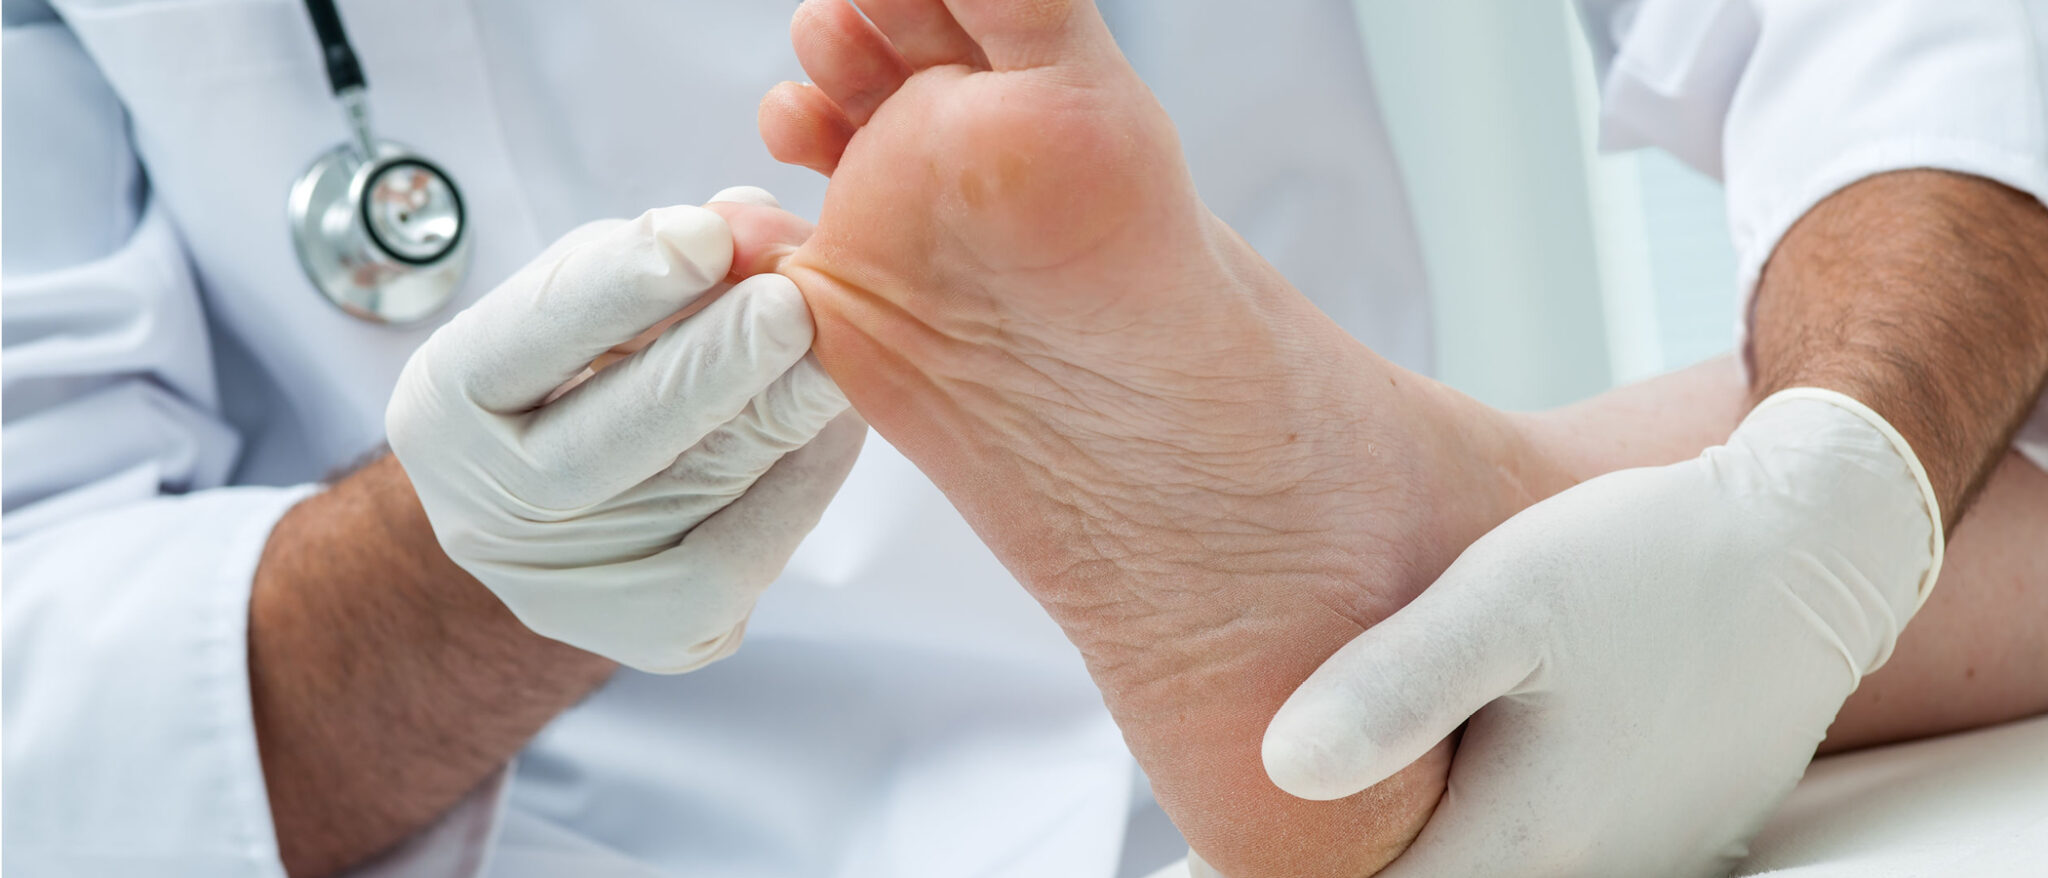 Management of Neuropathy and Related Ulcers